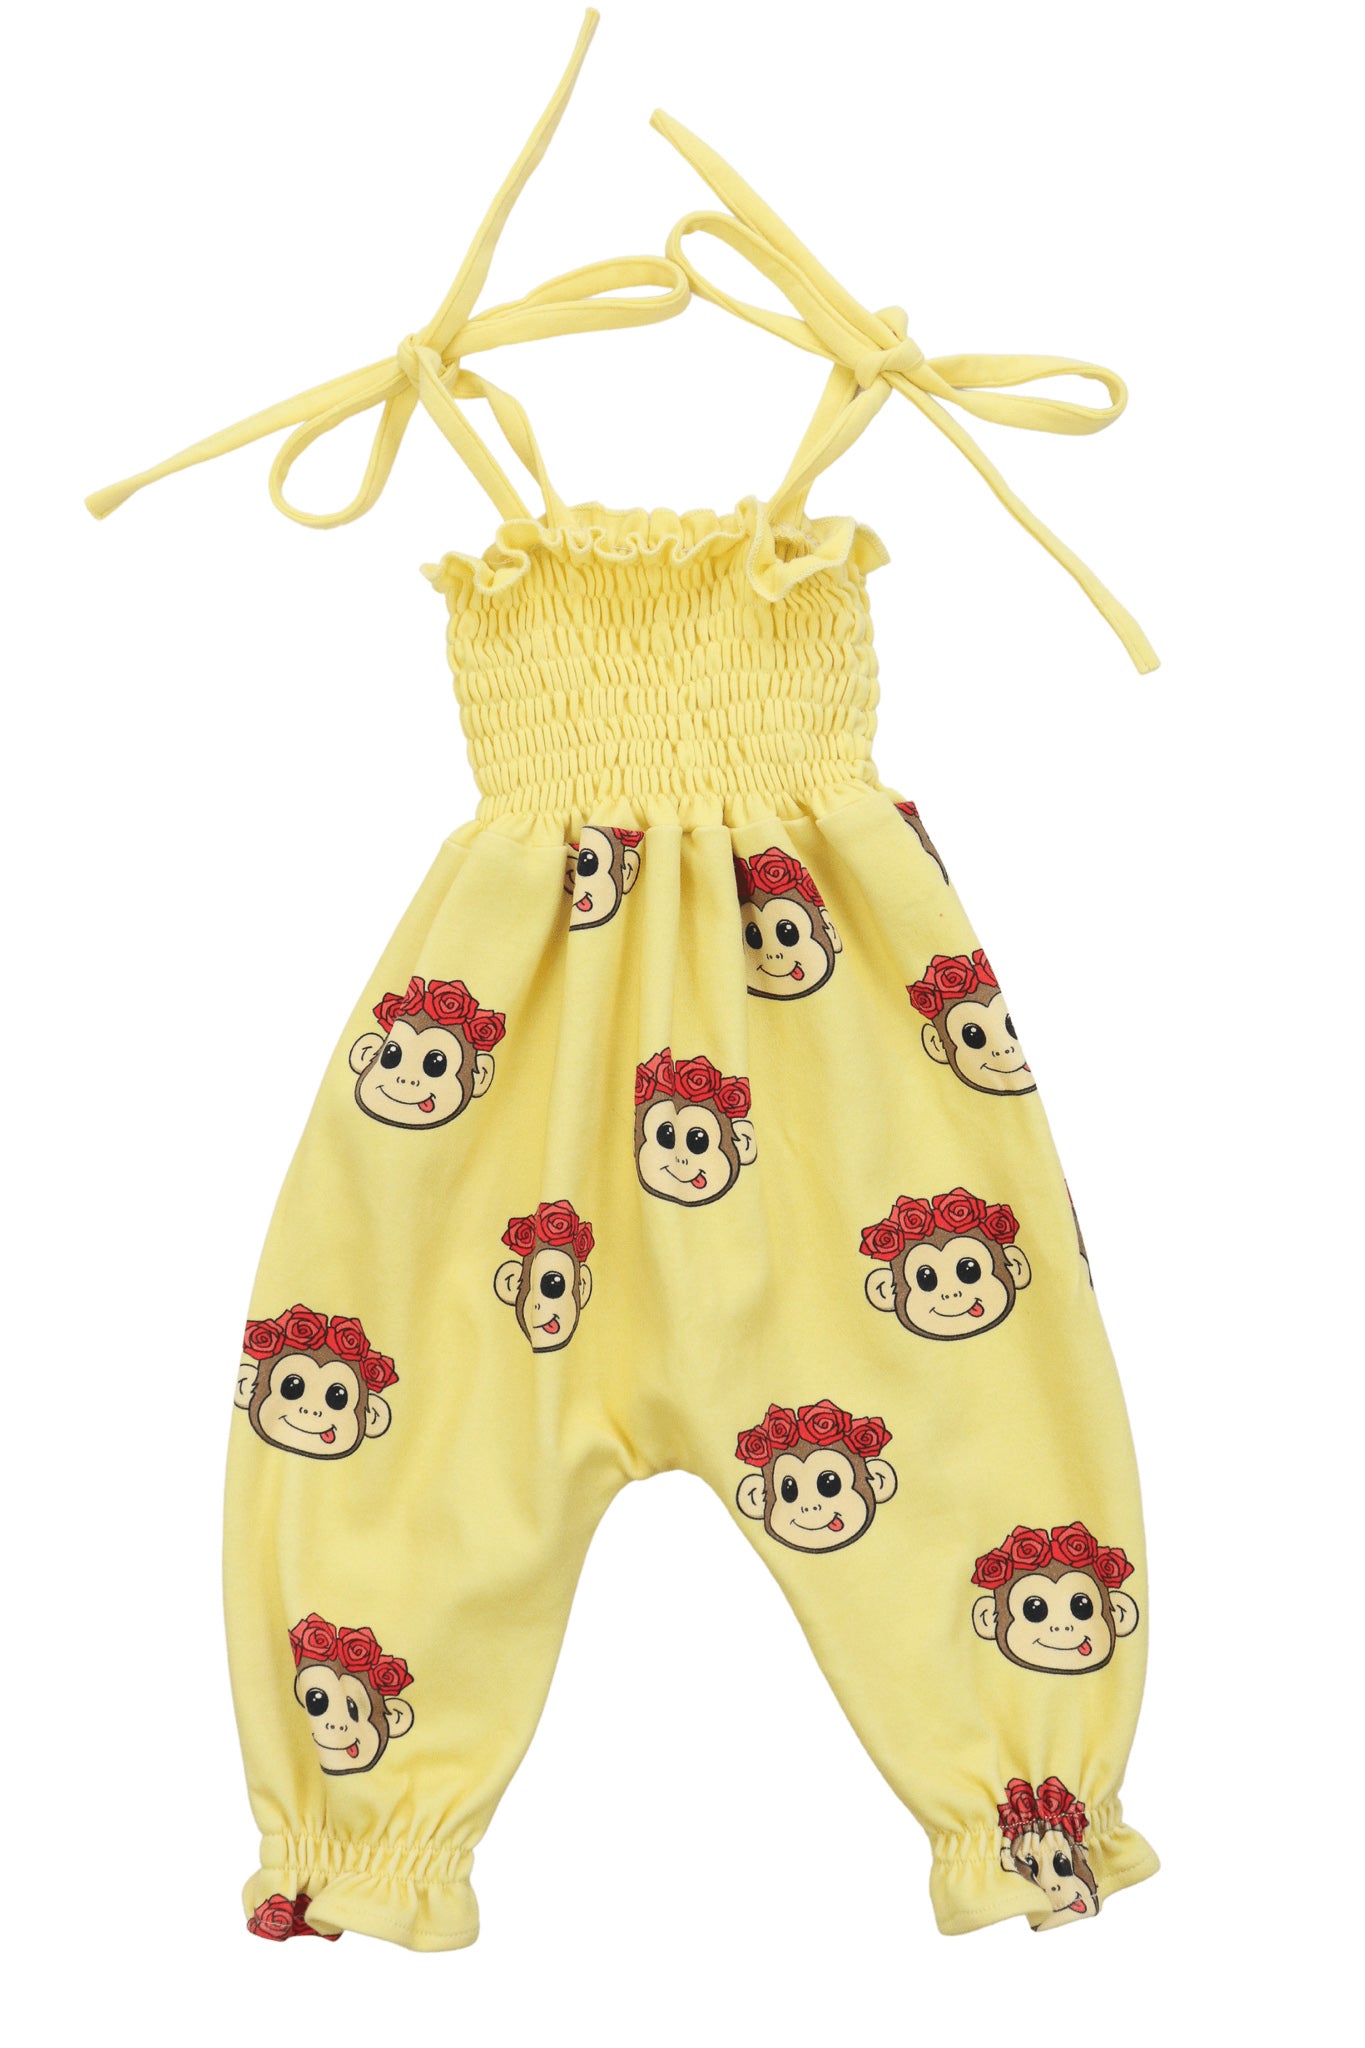 pastel yellow jumpsuit with cute monkey faced printed all over. Shirred top design and thin tie-up straps